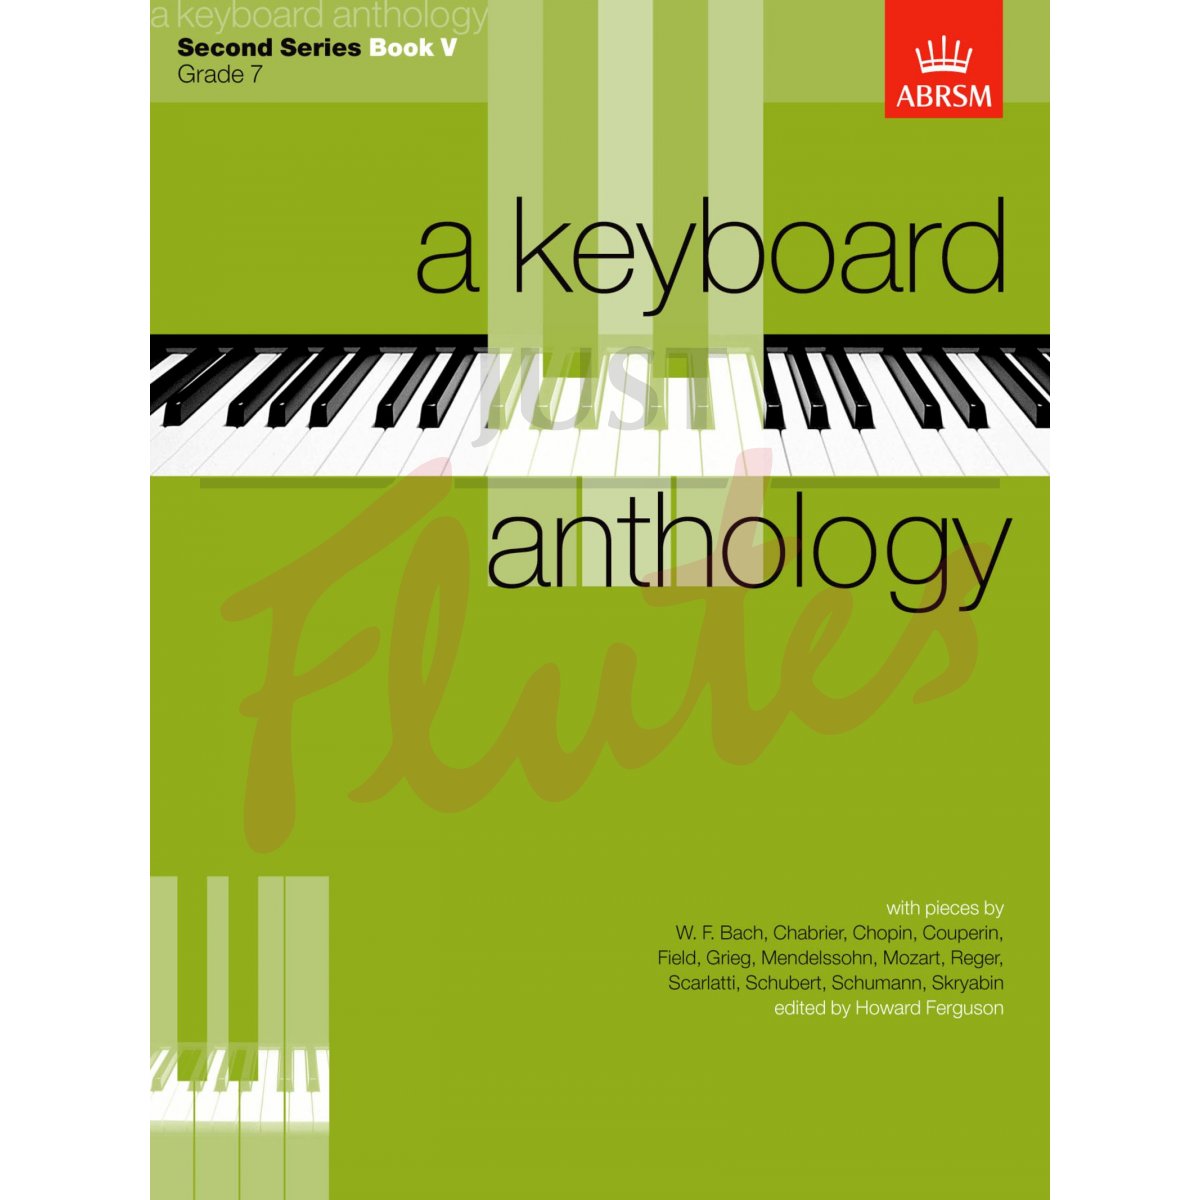 A Keyboard Anthology: Second Series Book 5